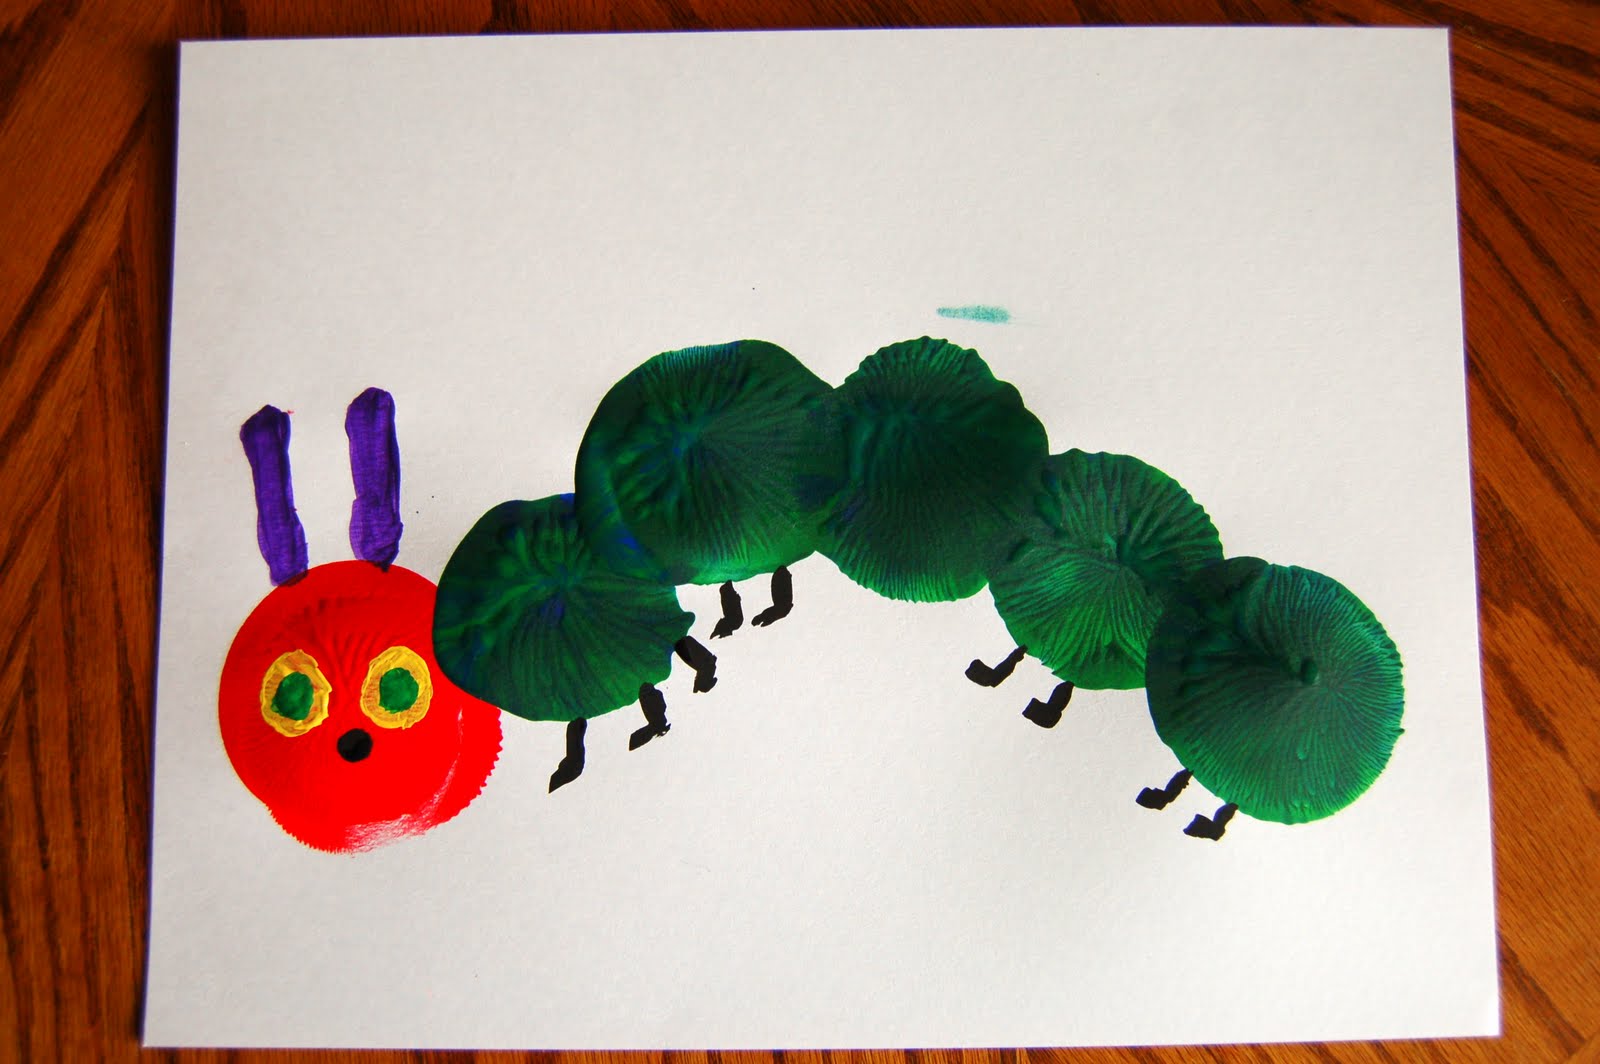 Story time "The Very Hungry Caterpillar" with Crafts She's Crafty